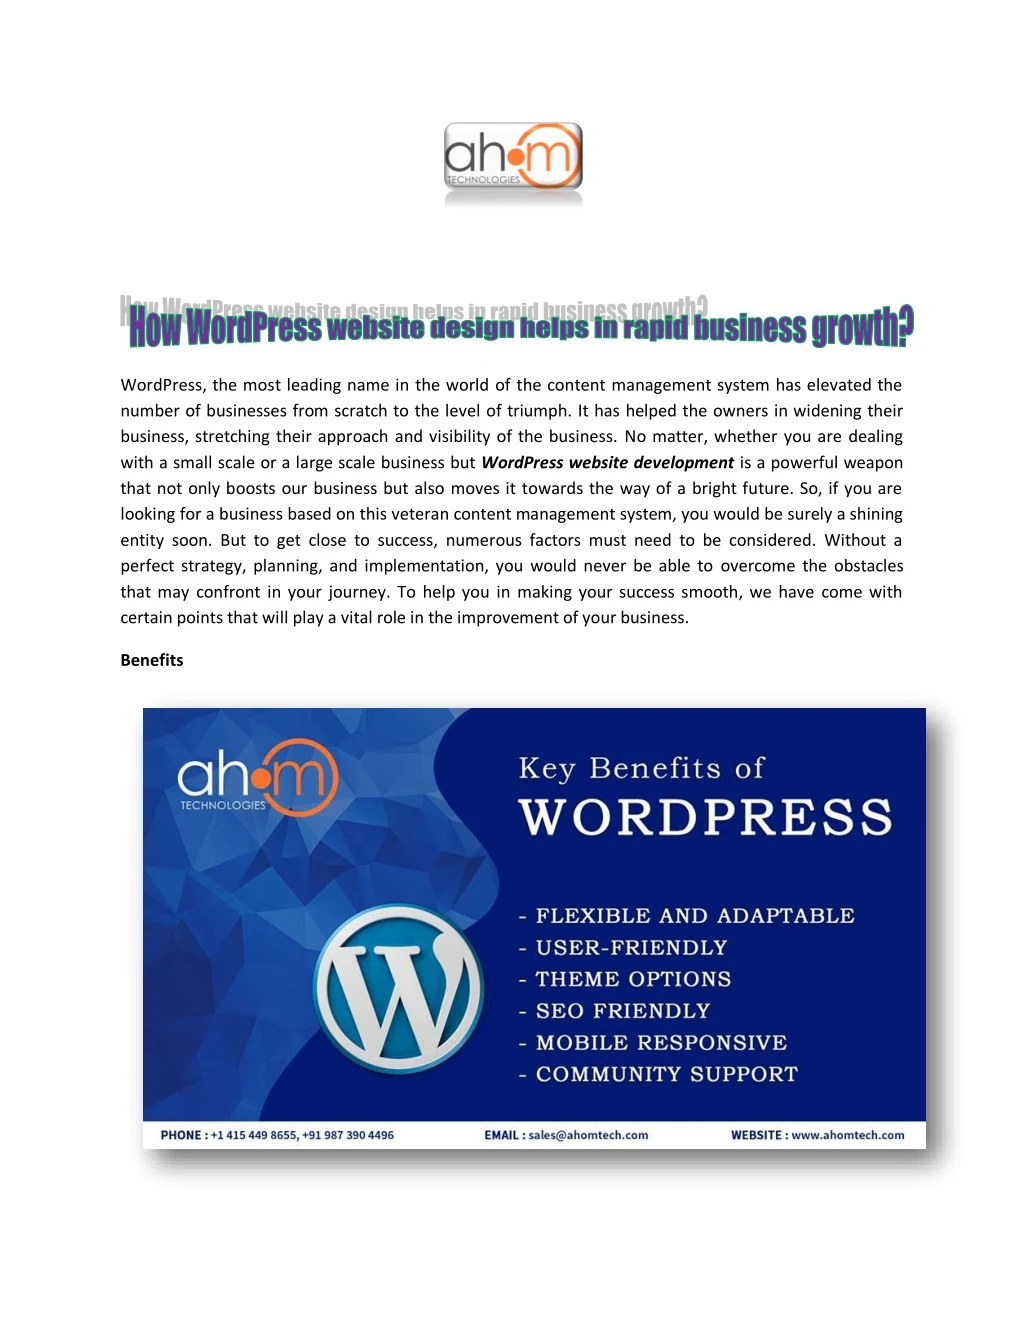 wordpress the most leading name in the world